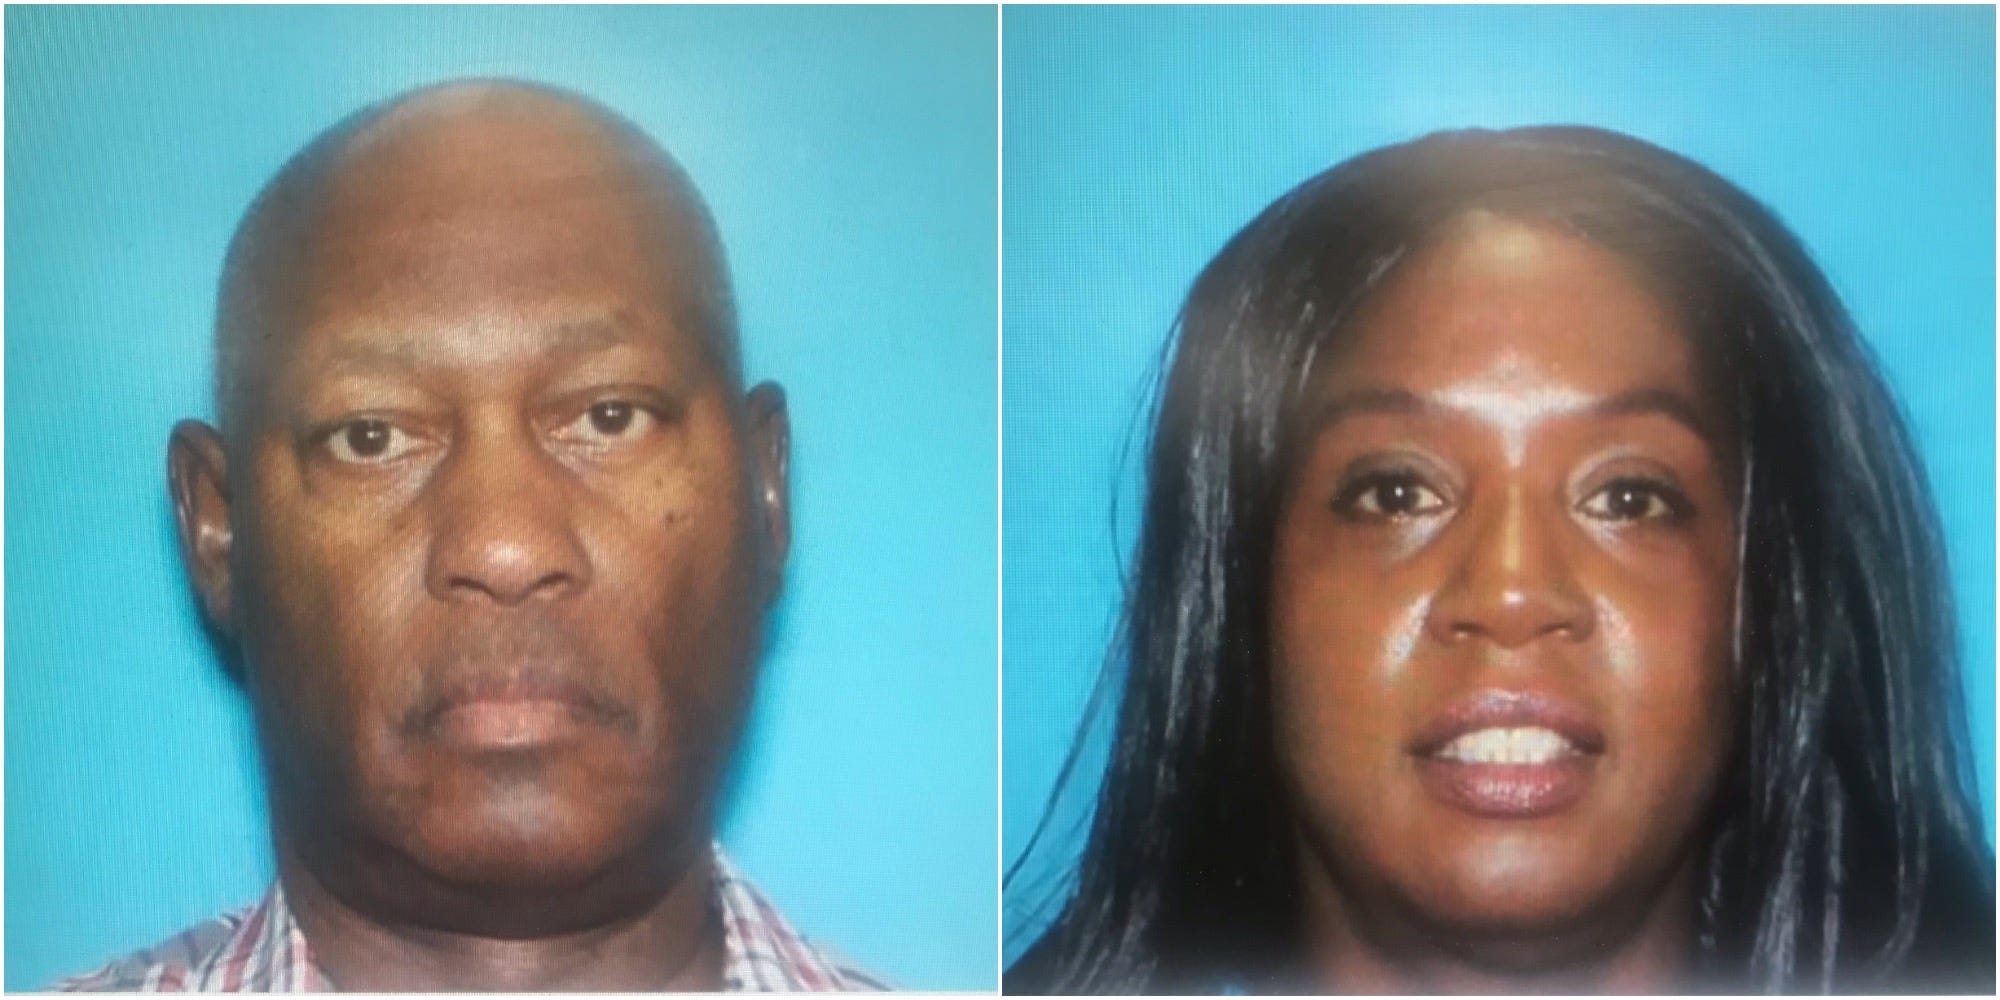 Images of David Green, 58, and Ramona Cooper, 60, both shot by Nathan Allen